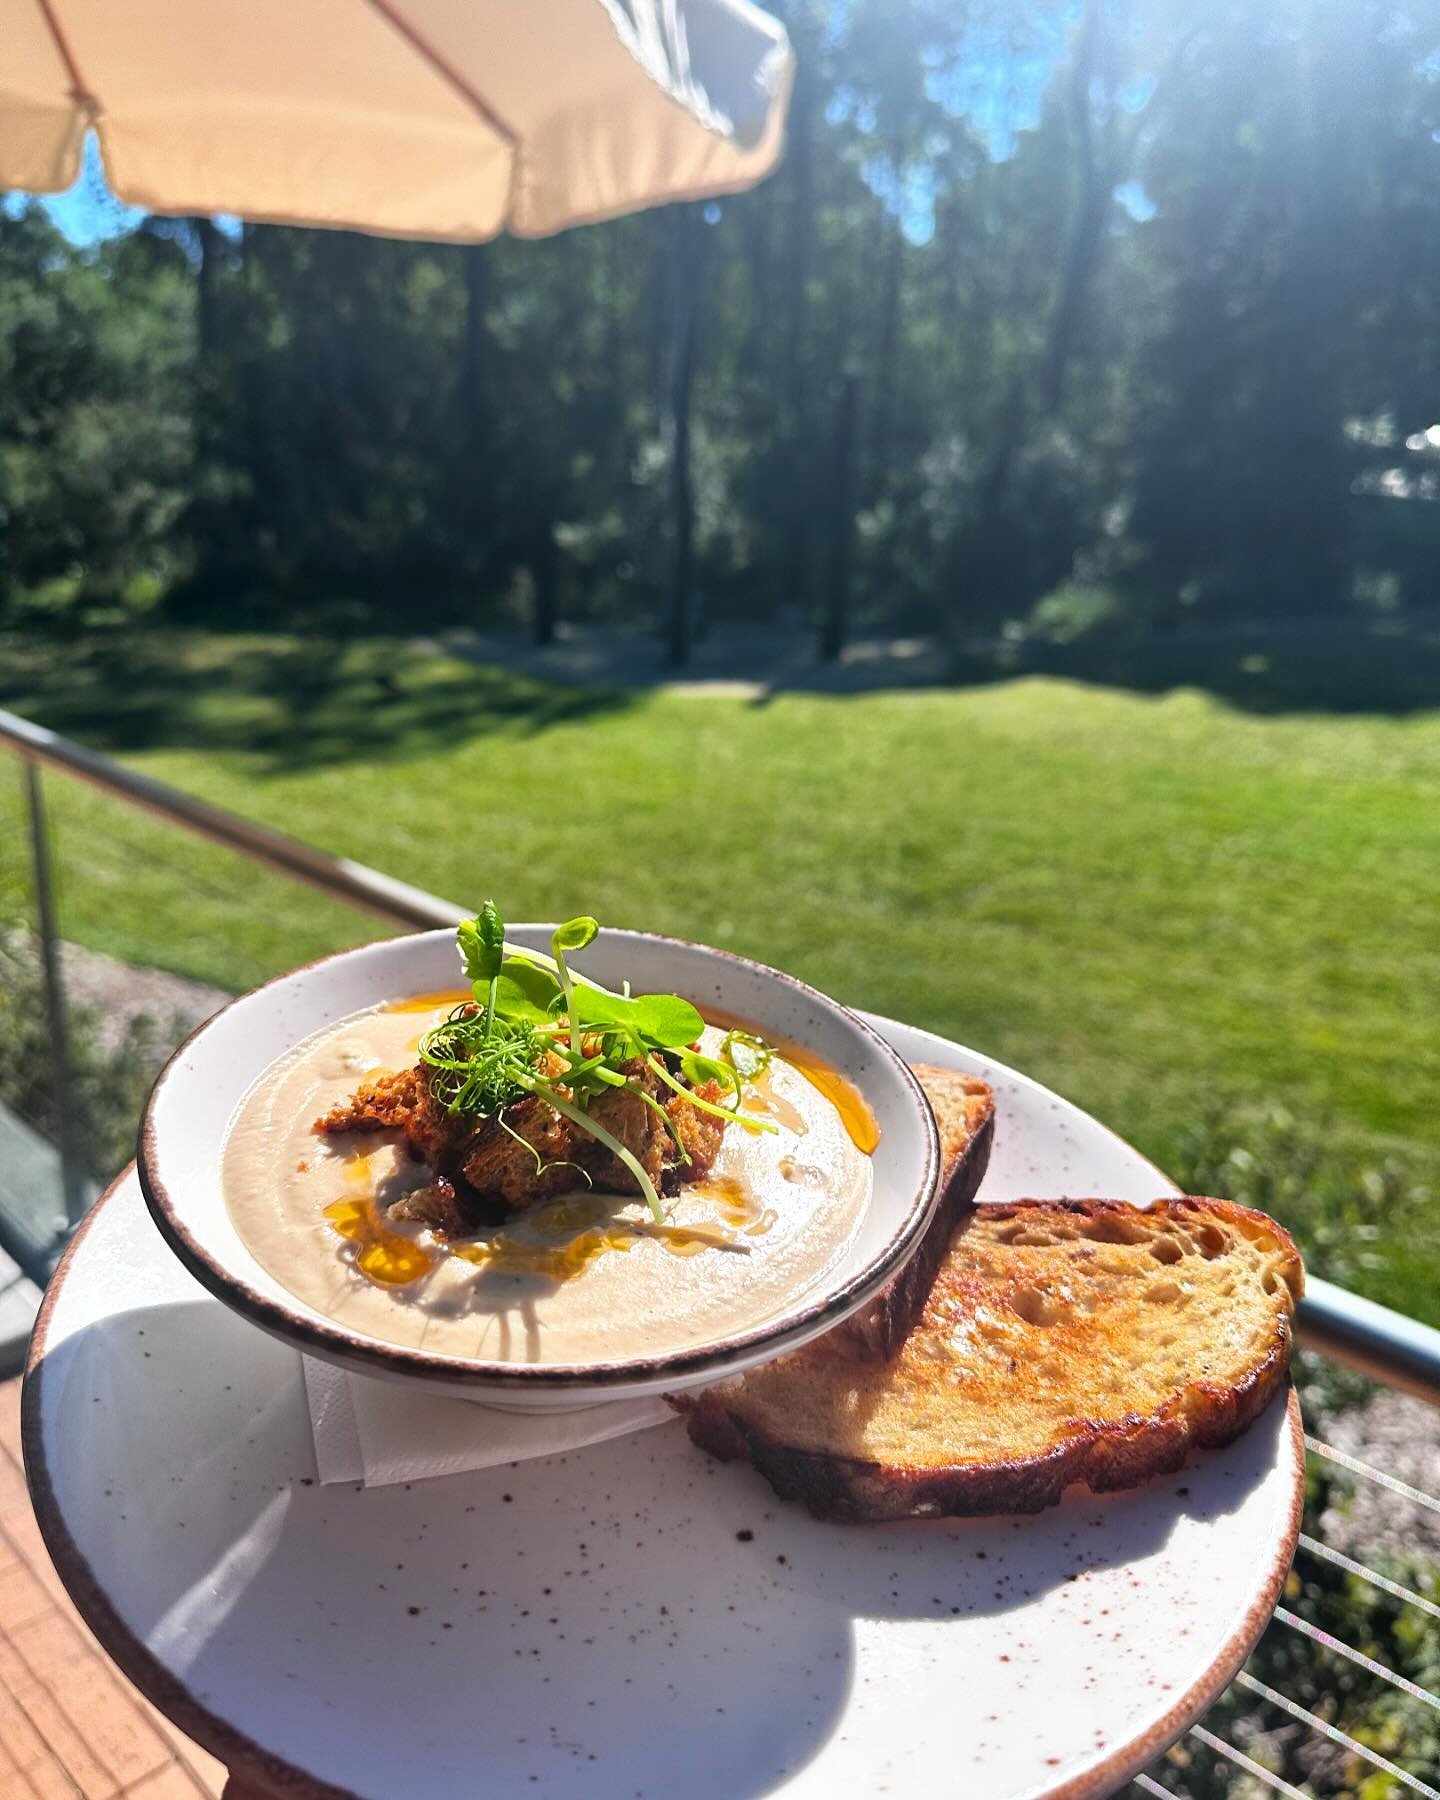 What happened to soup weather? This one is so good it doesn&rsquo;t matter! 🌧️🌧️

Roasted cauliflower w/ harissa and garlic croutons 😋😋

#mossyspecial #soup #cauliflowersoup #yum #lunch #schoolgolidays 

@mossyontrain 
@mossyongardens
@eat_drink_